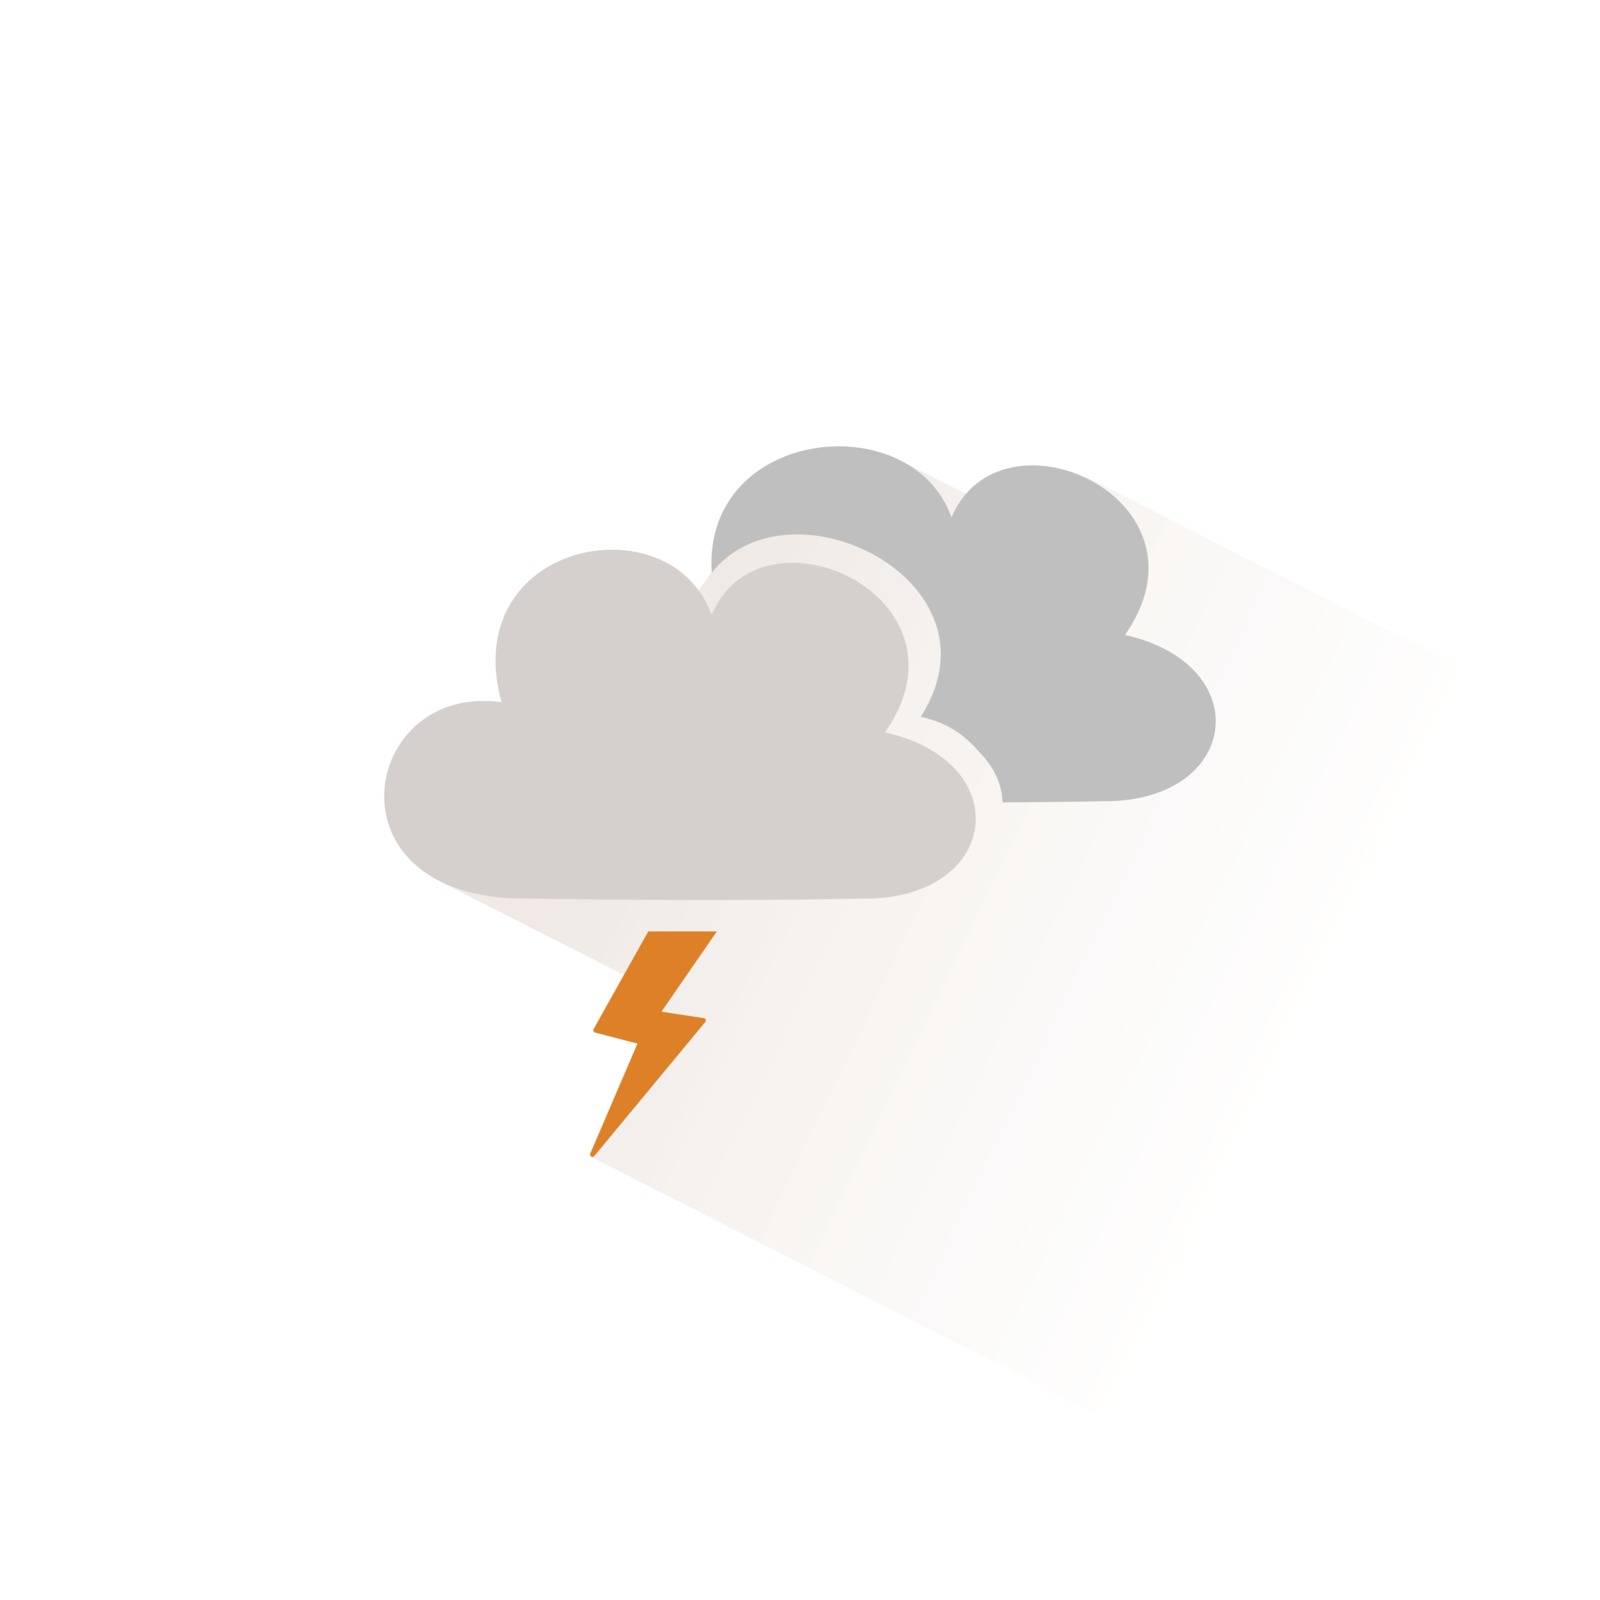 Storm color icon with shadow. Flat vector illustration